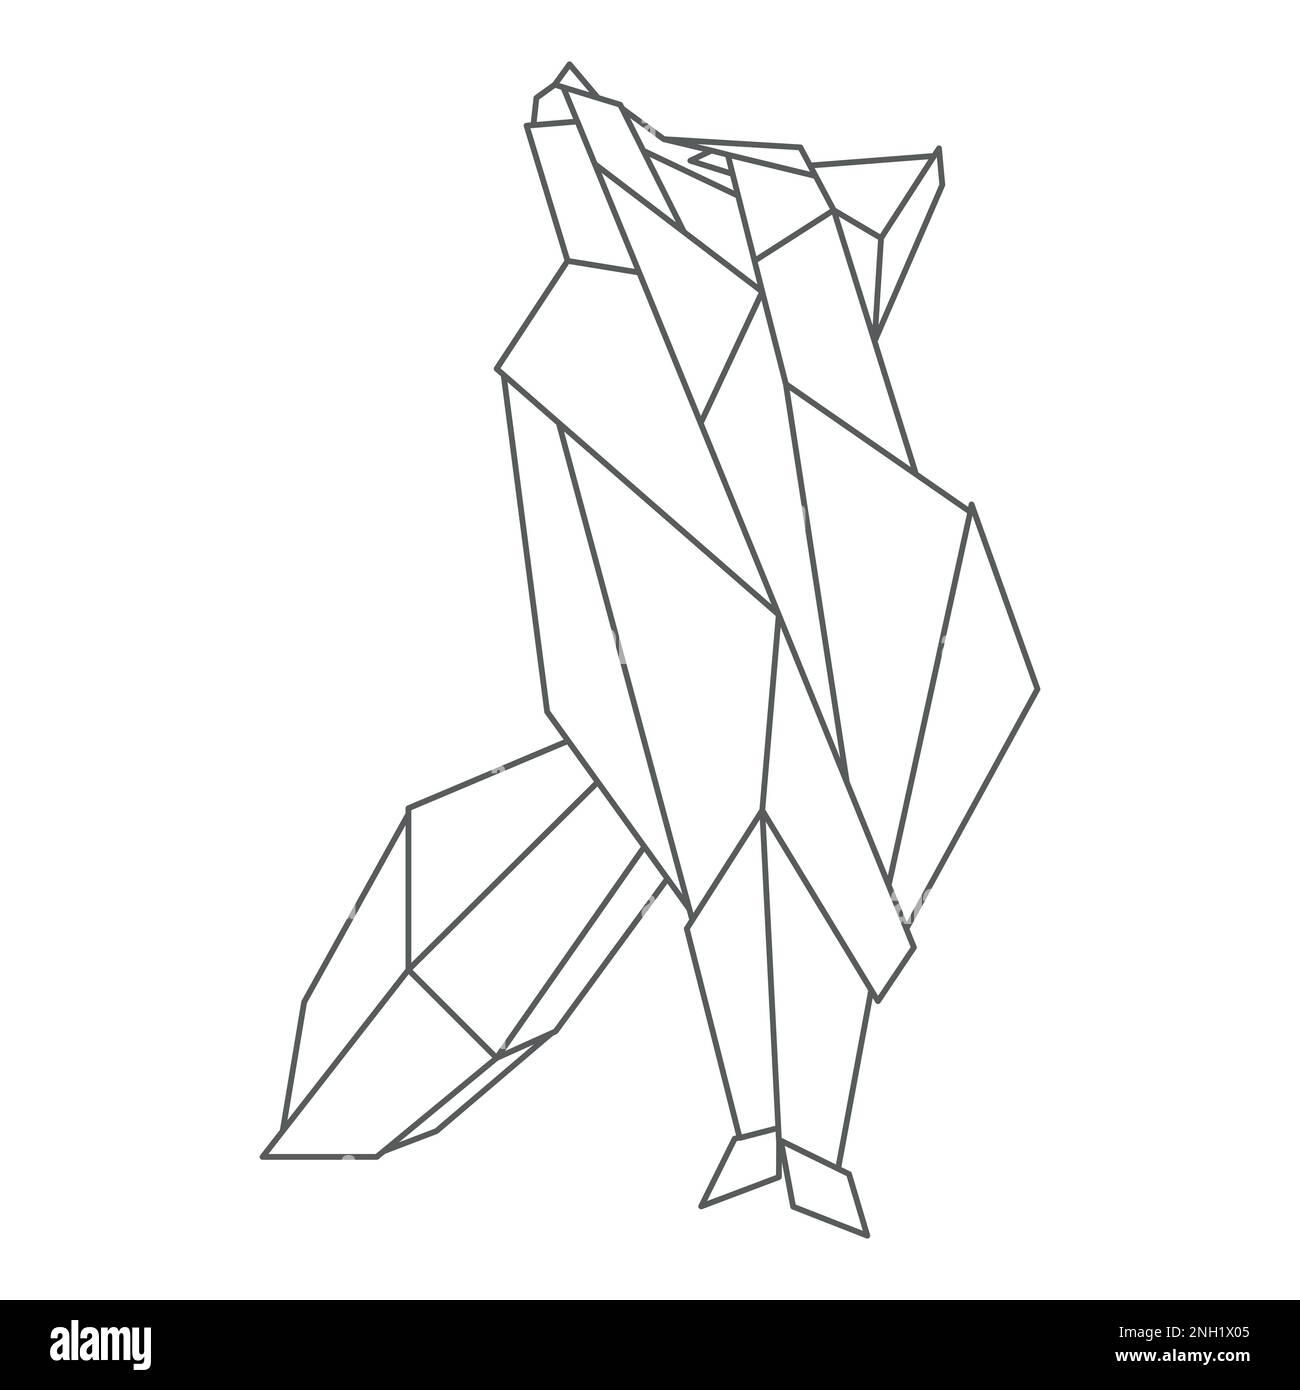 Fox looks up with his tongue out. Geometric linear wild animal. Abstract minimalistic illustration. Stylish modern clipart for design of branded Stock Vector